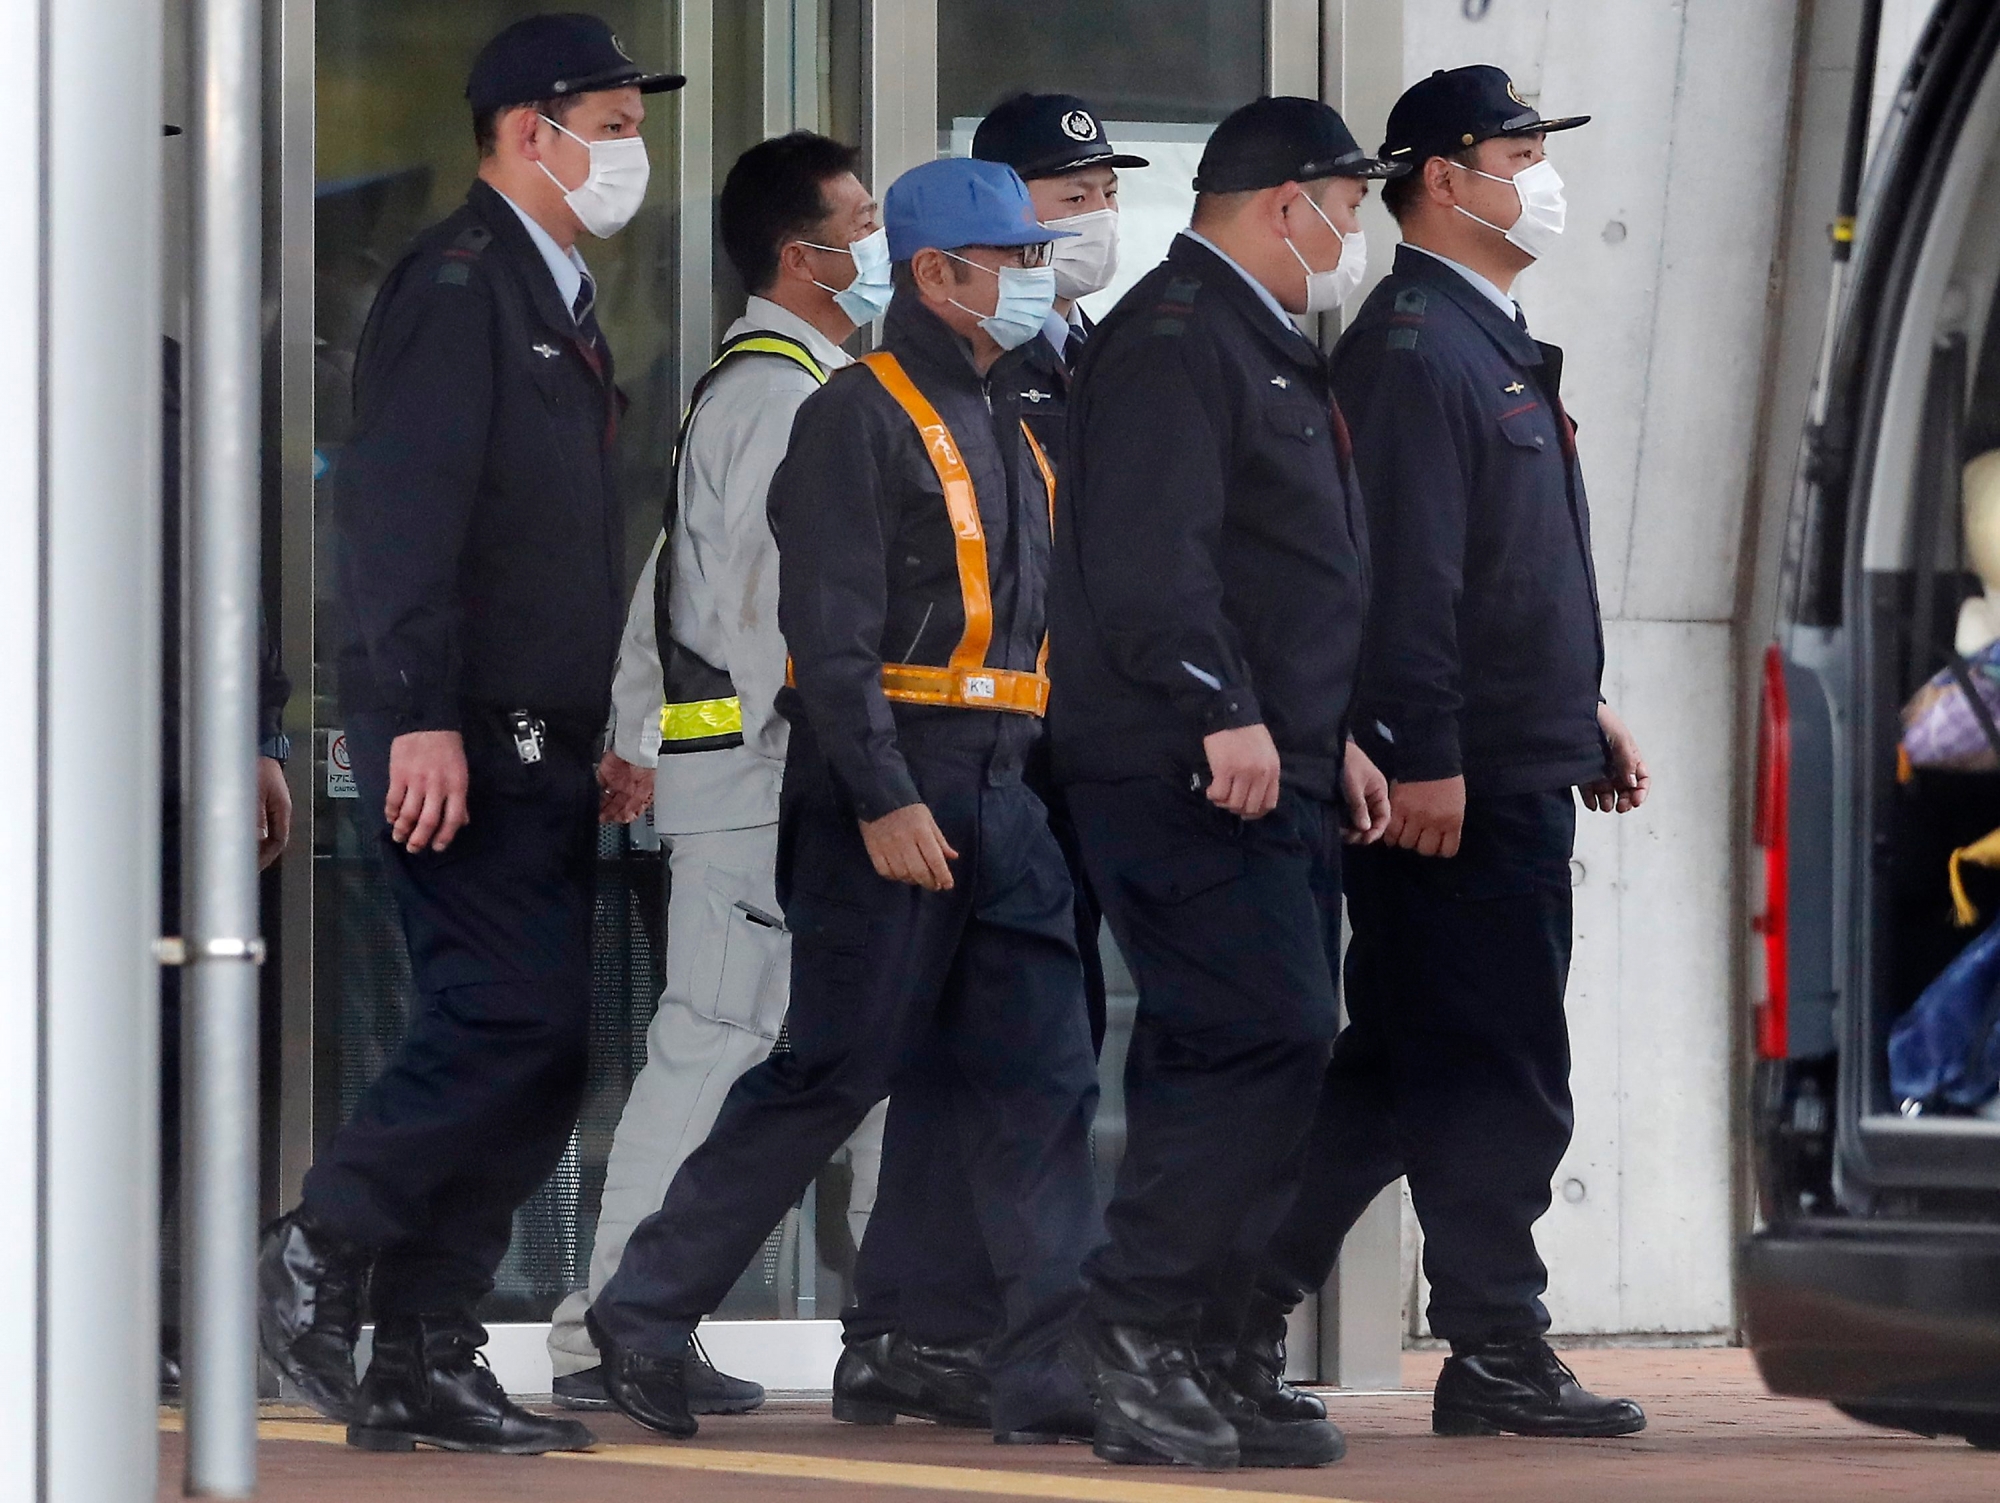 A masked man, center with blue cap, believed to be former Nissan Chairman Carlos Ghosn, walks out with security guards from Tokyo Detention Center in Tokyo Wednesday, March 6, 2019, after posting 1 billion yen ($8.9 million) in bail once an appeal by prosecutors against his release was rejected. (AP Photo/Eugene Hoshiko) Japan Nissan Ghosn